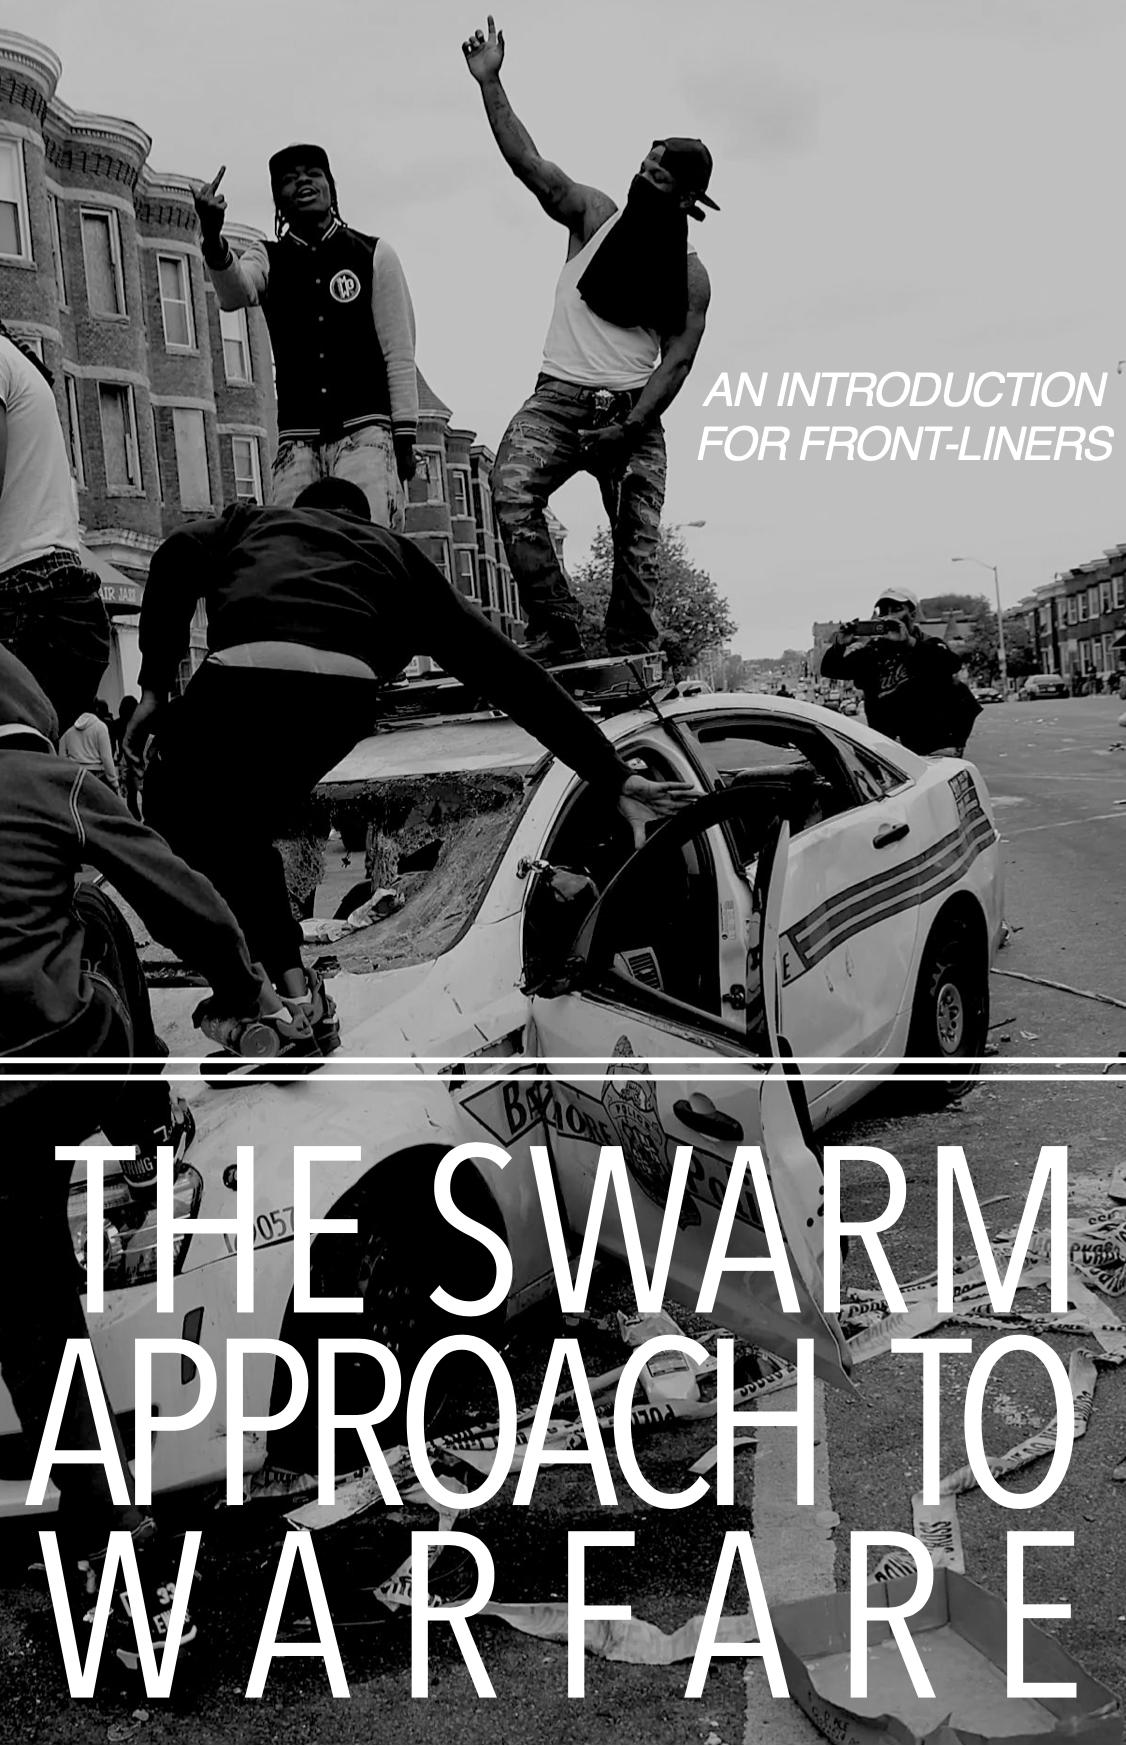 Cover Image for The Swarm Approach to Warfare: an Introduction for Frontliners